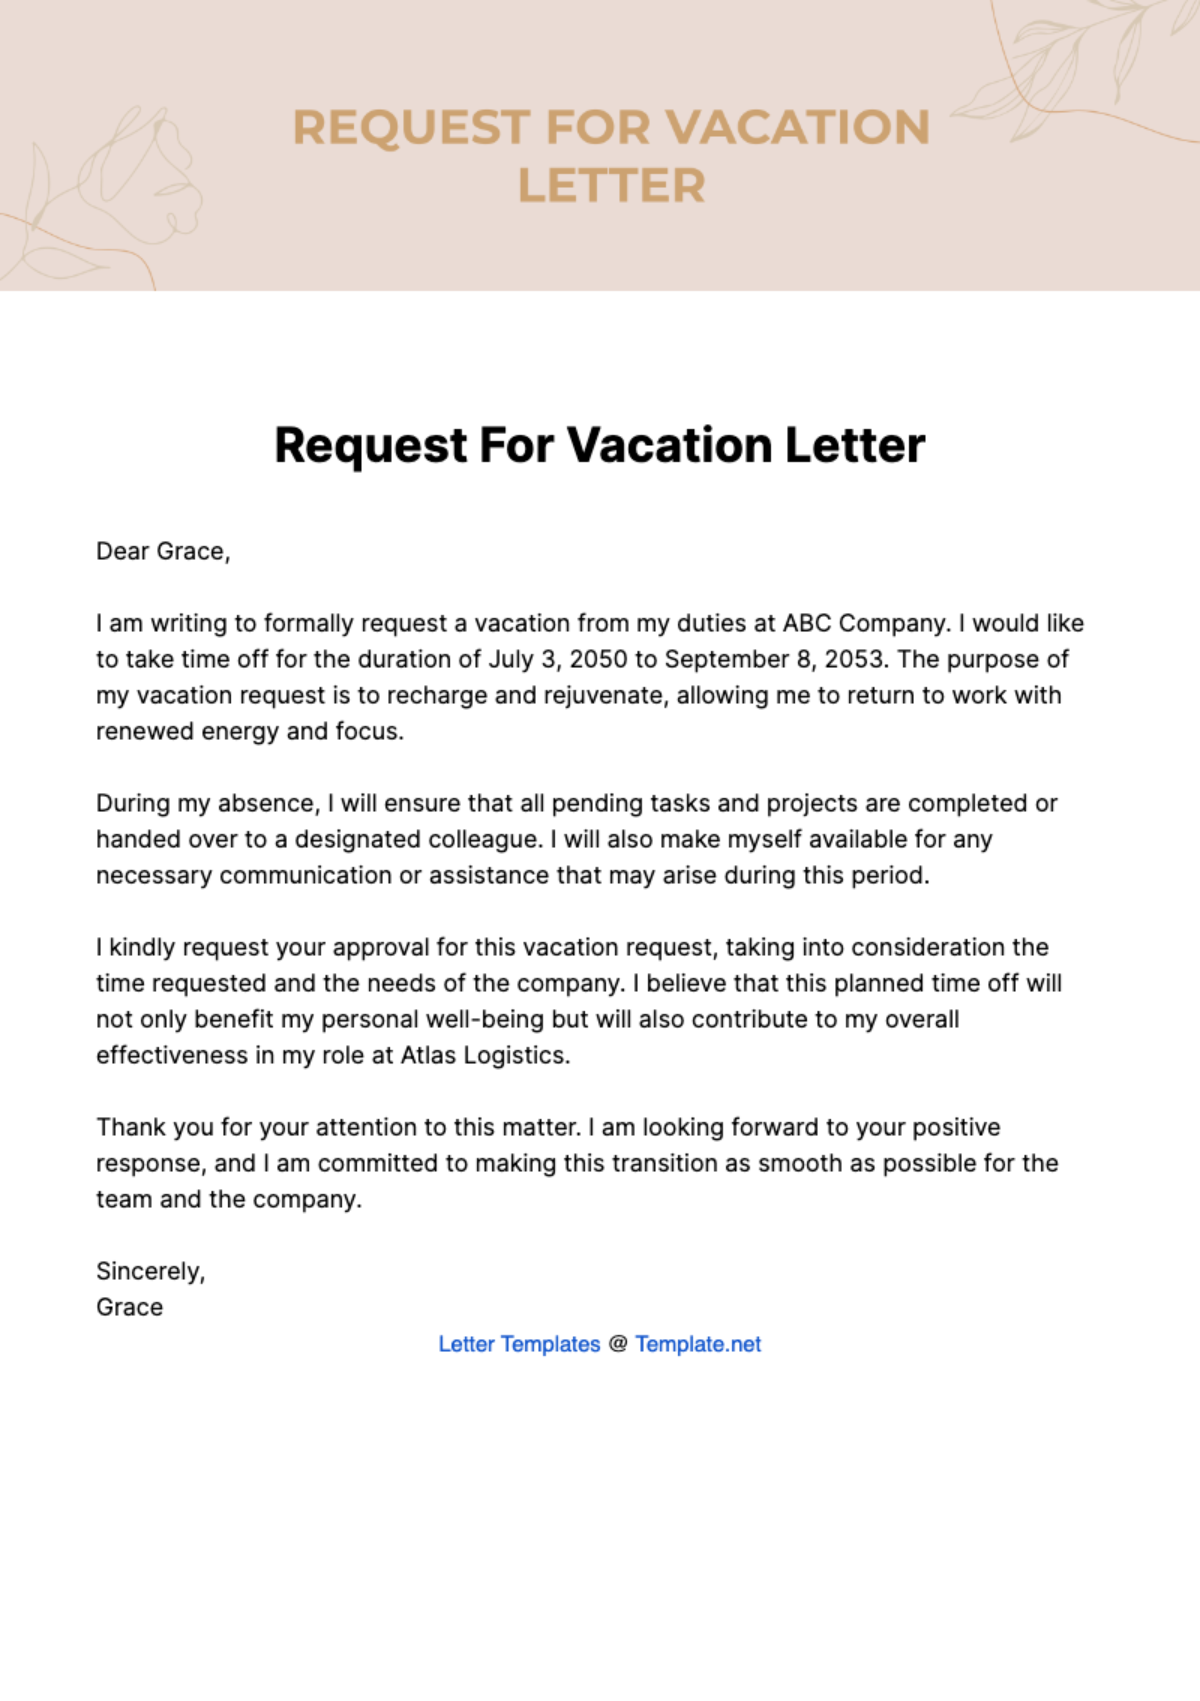 Free Request For Vacation Letter Template